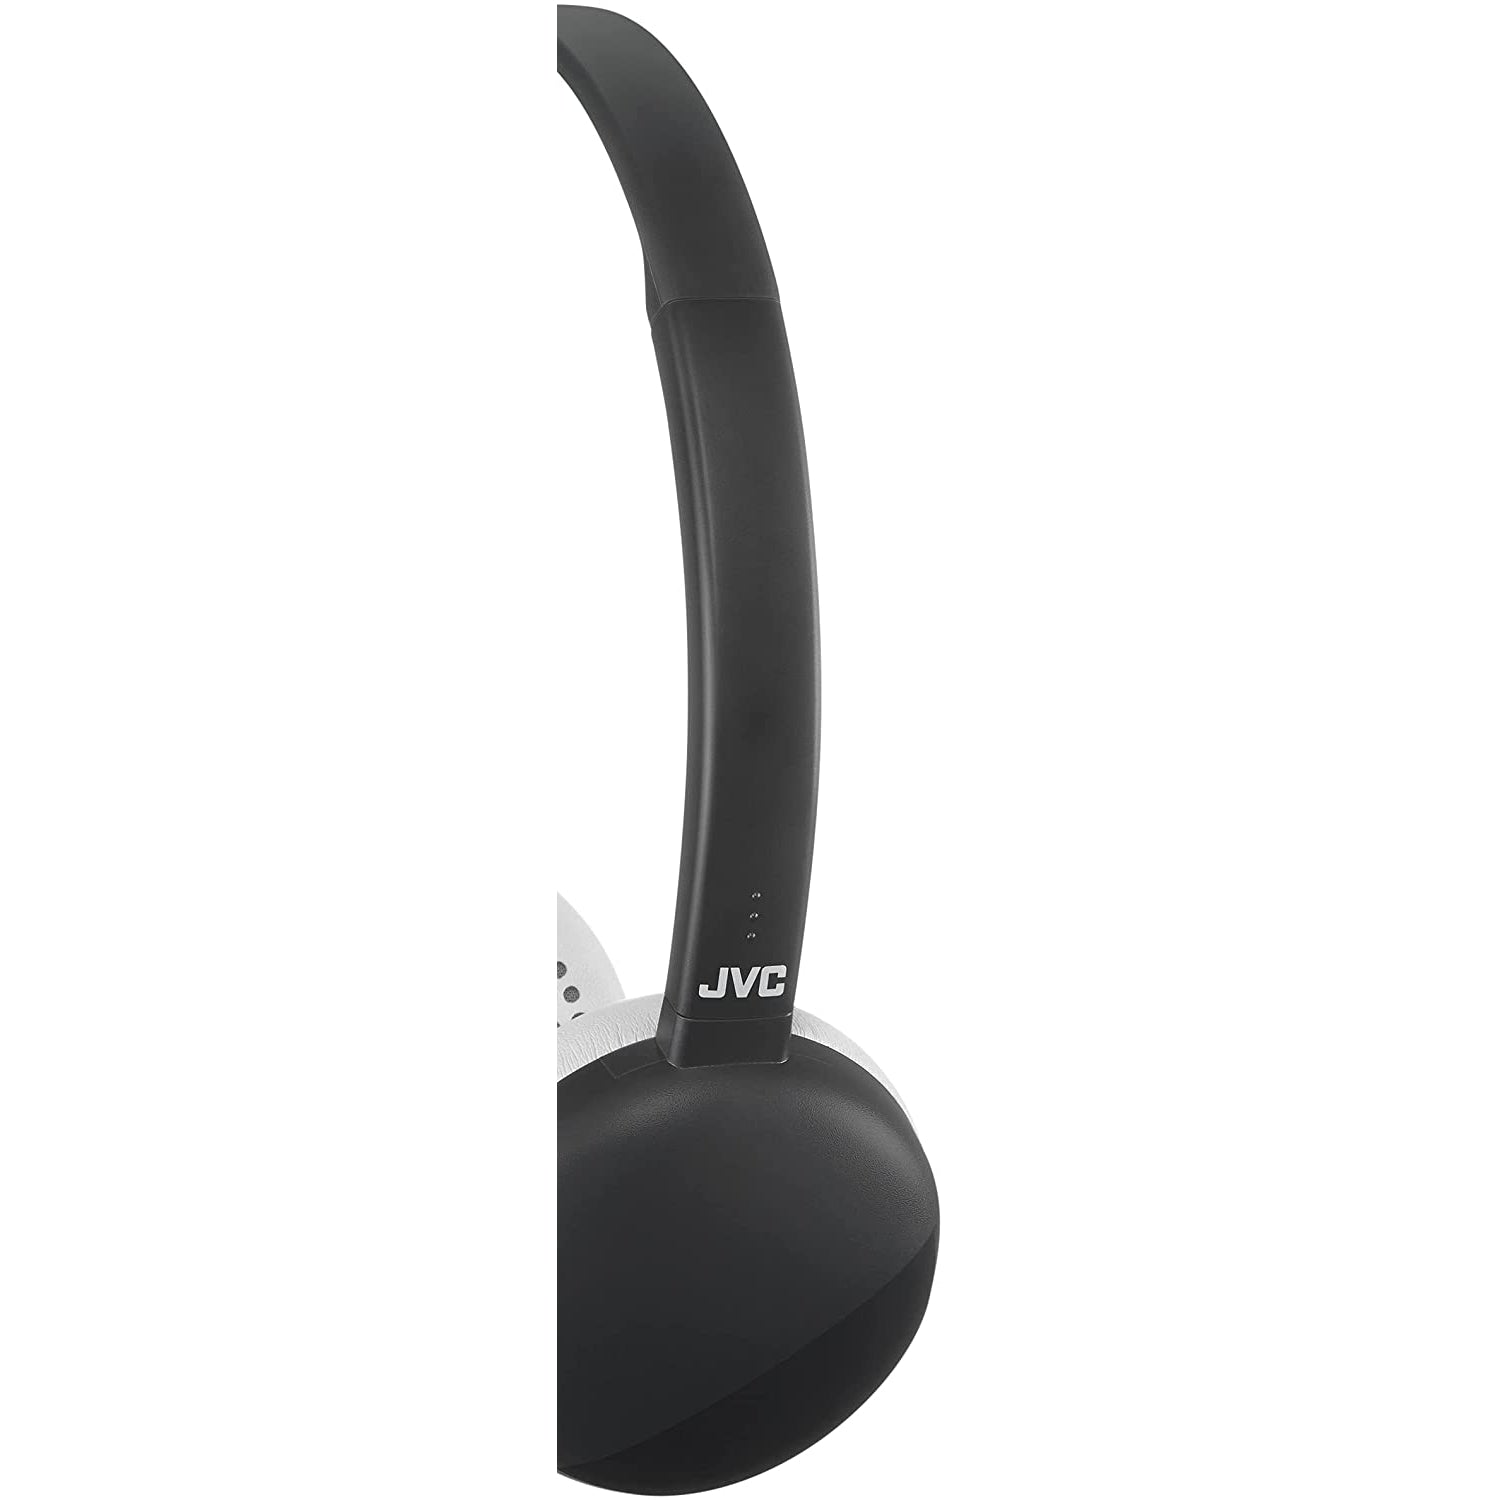 JVC S20BT Wireless Bluetooth On Ear Headphones Foldable with Built-In Remote and Mic for Hands Call Handling, Black